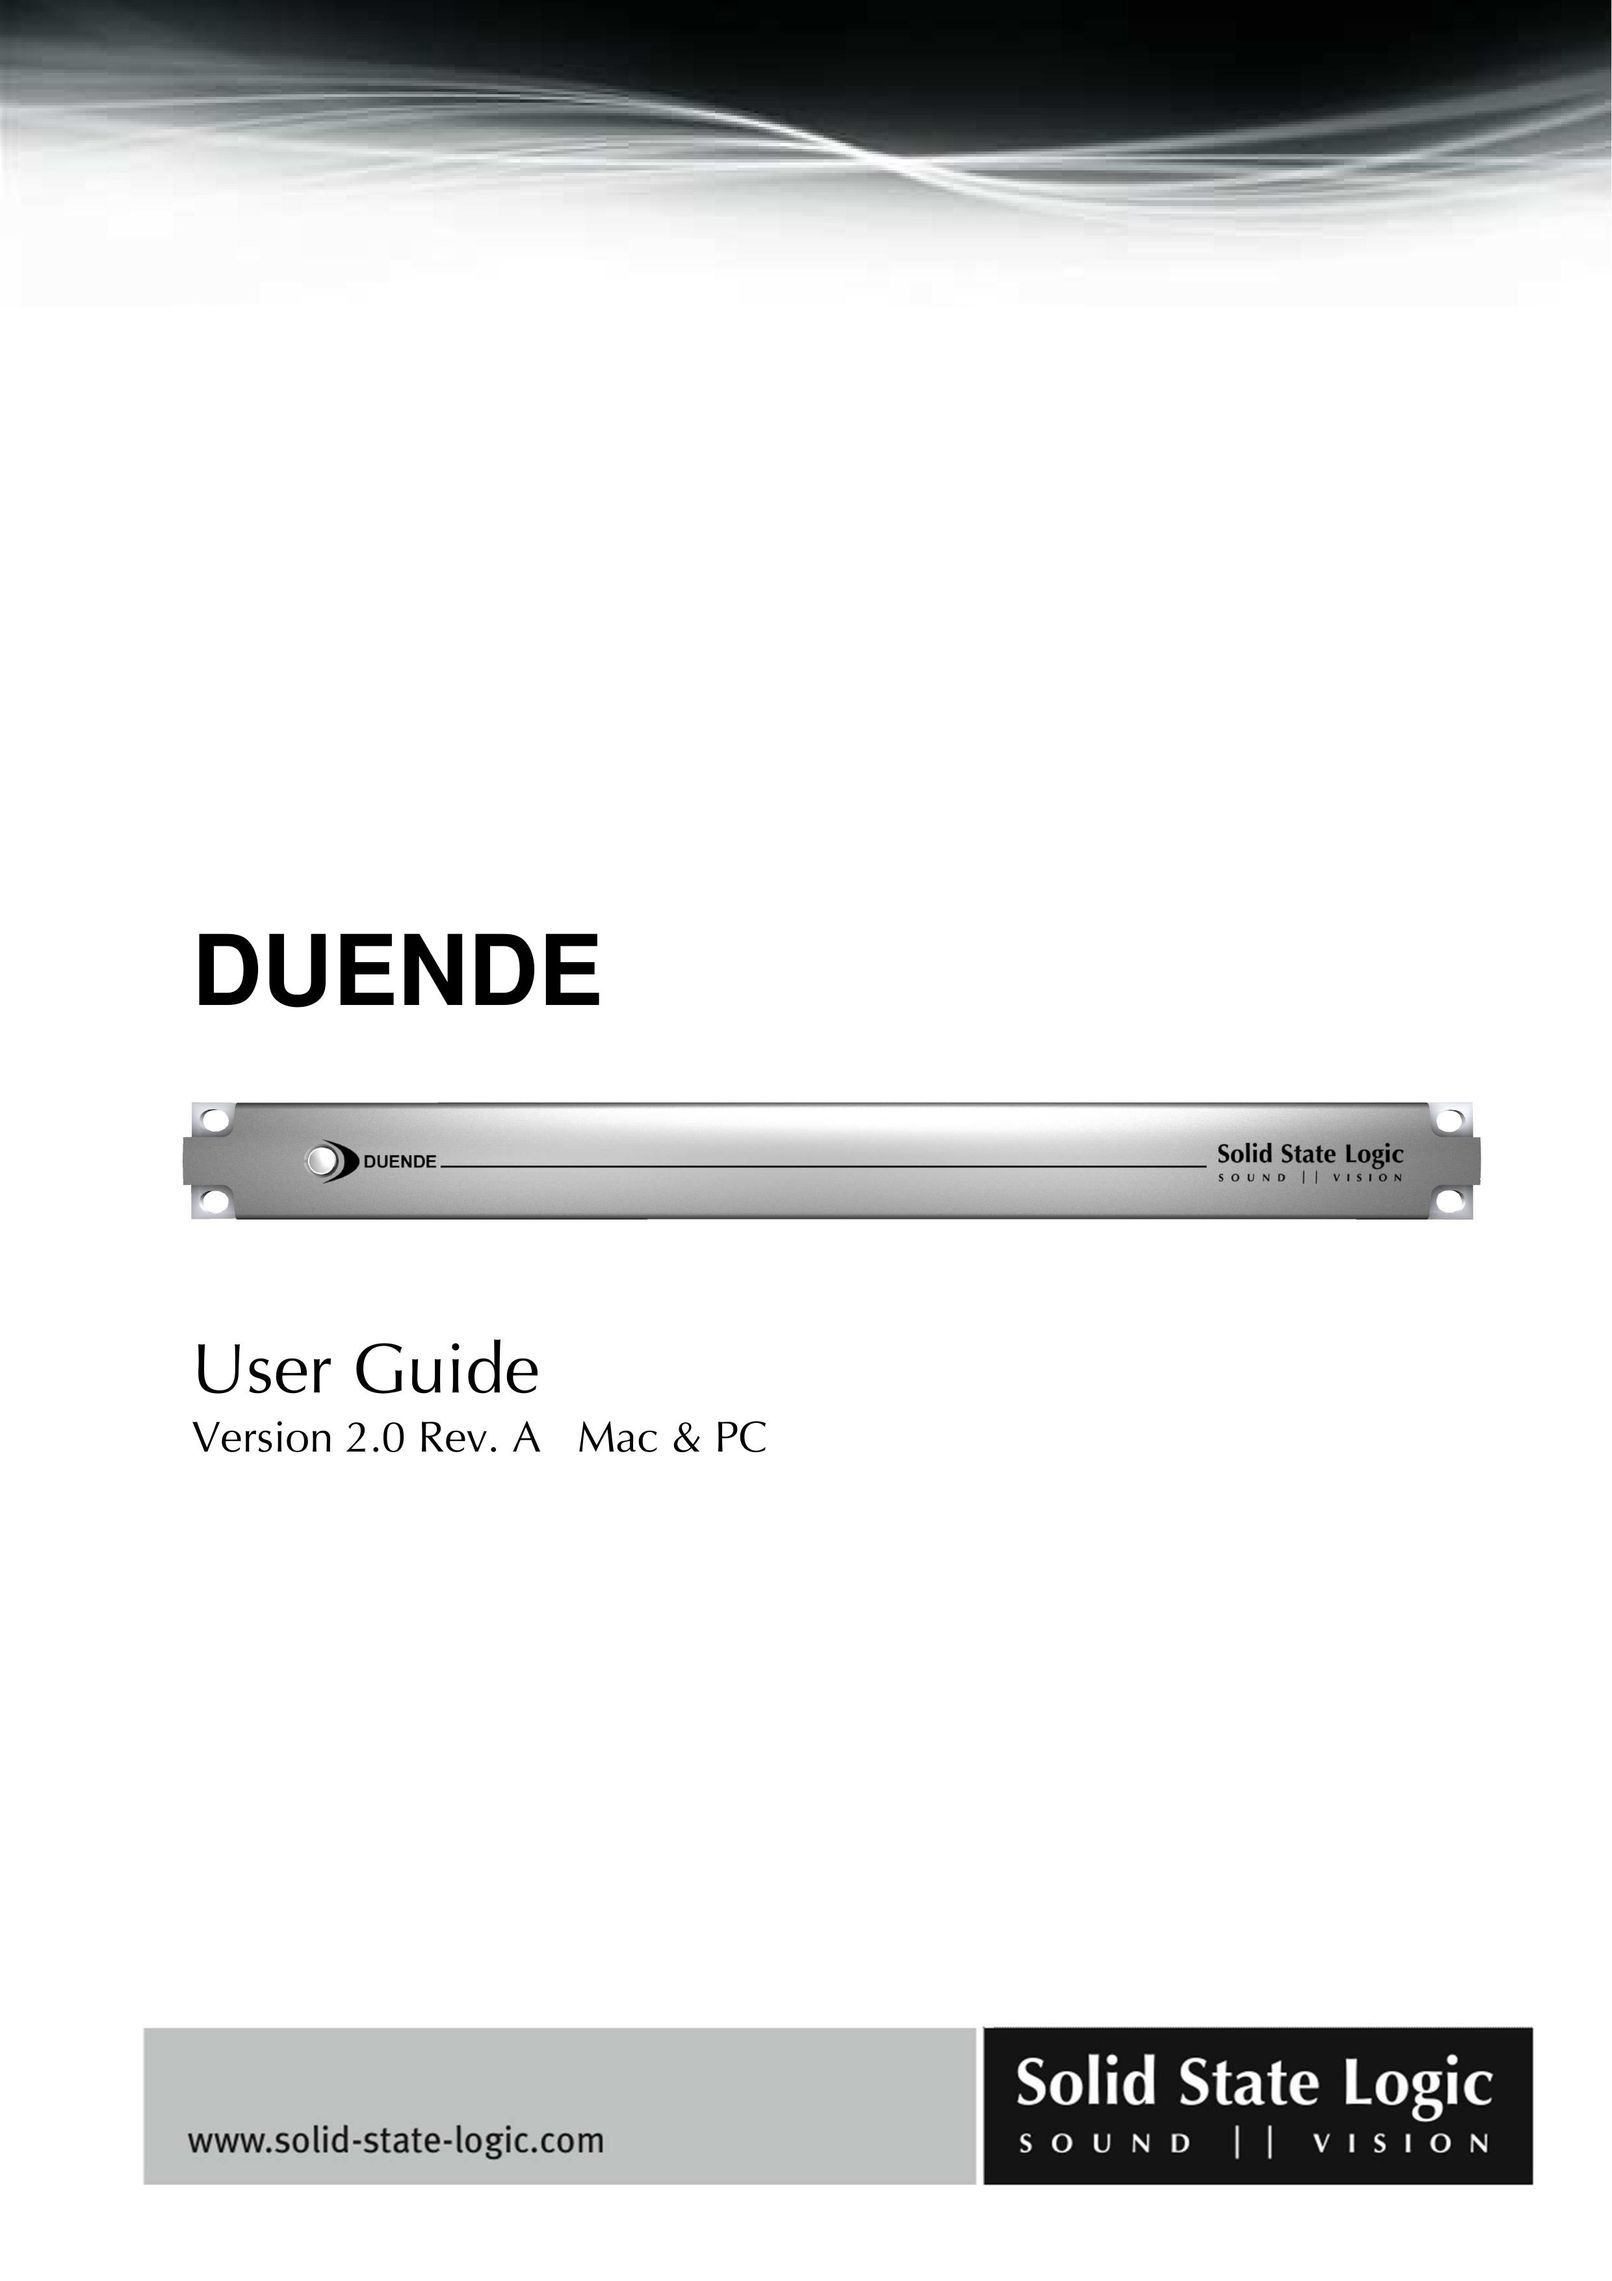 Solid State Logic DUENDE Stereo Equalizer User Manual